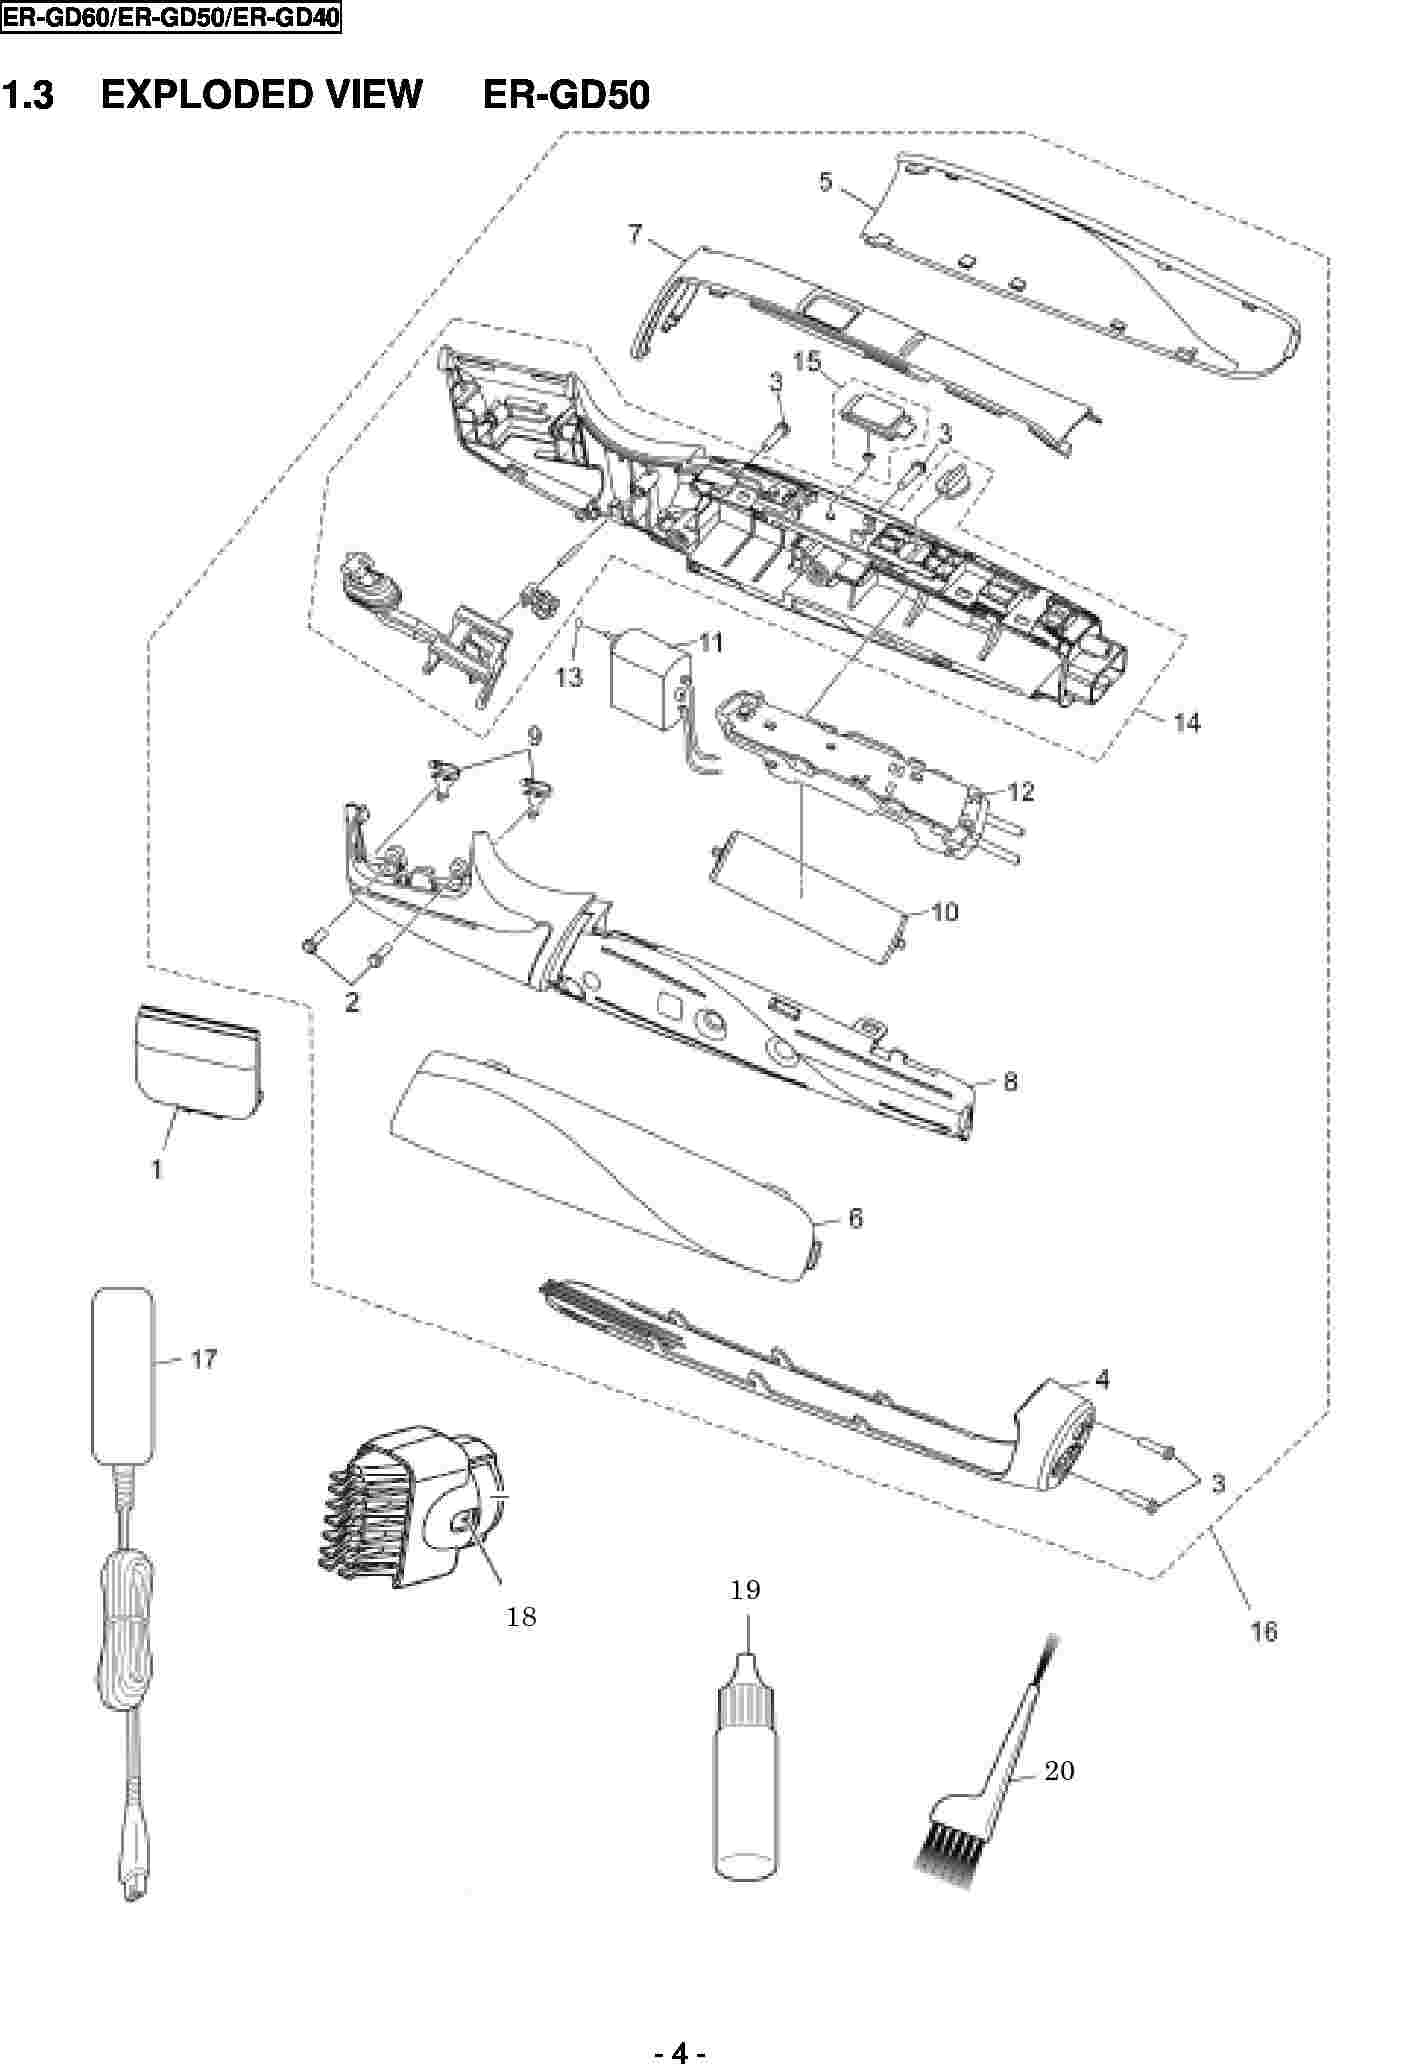 ER-GD50: Exploded View